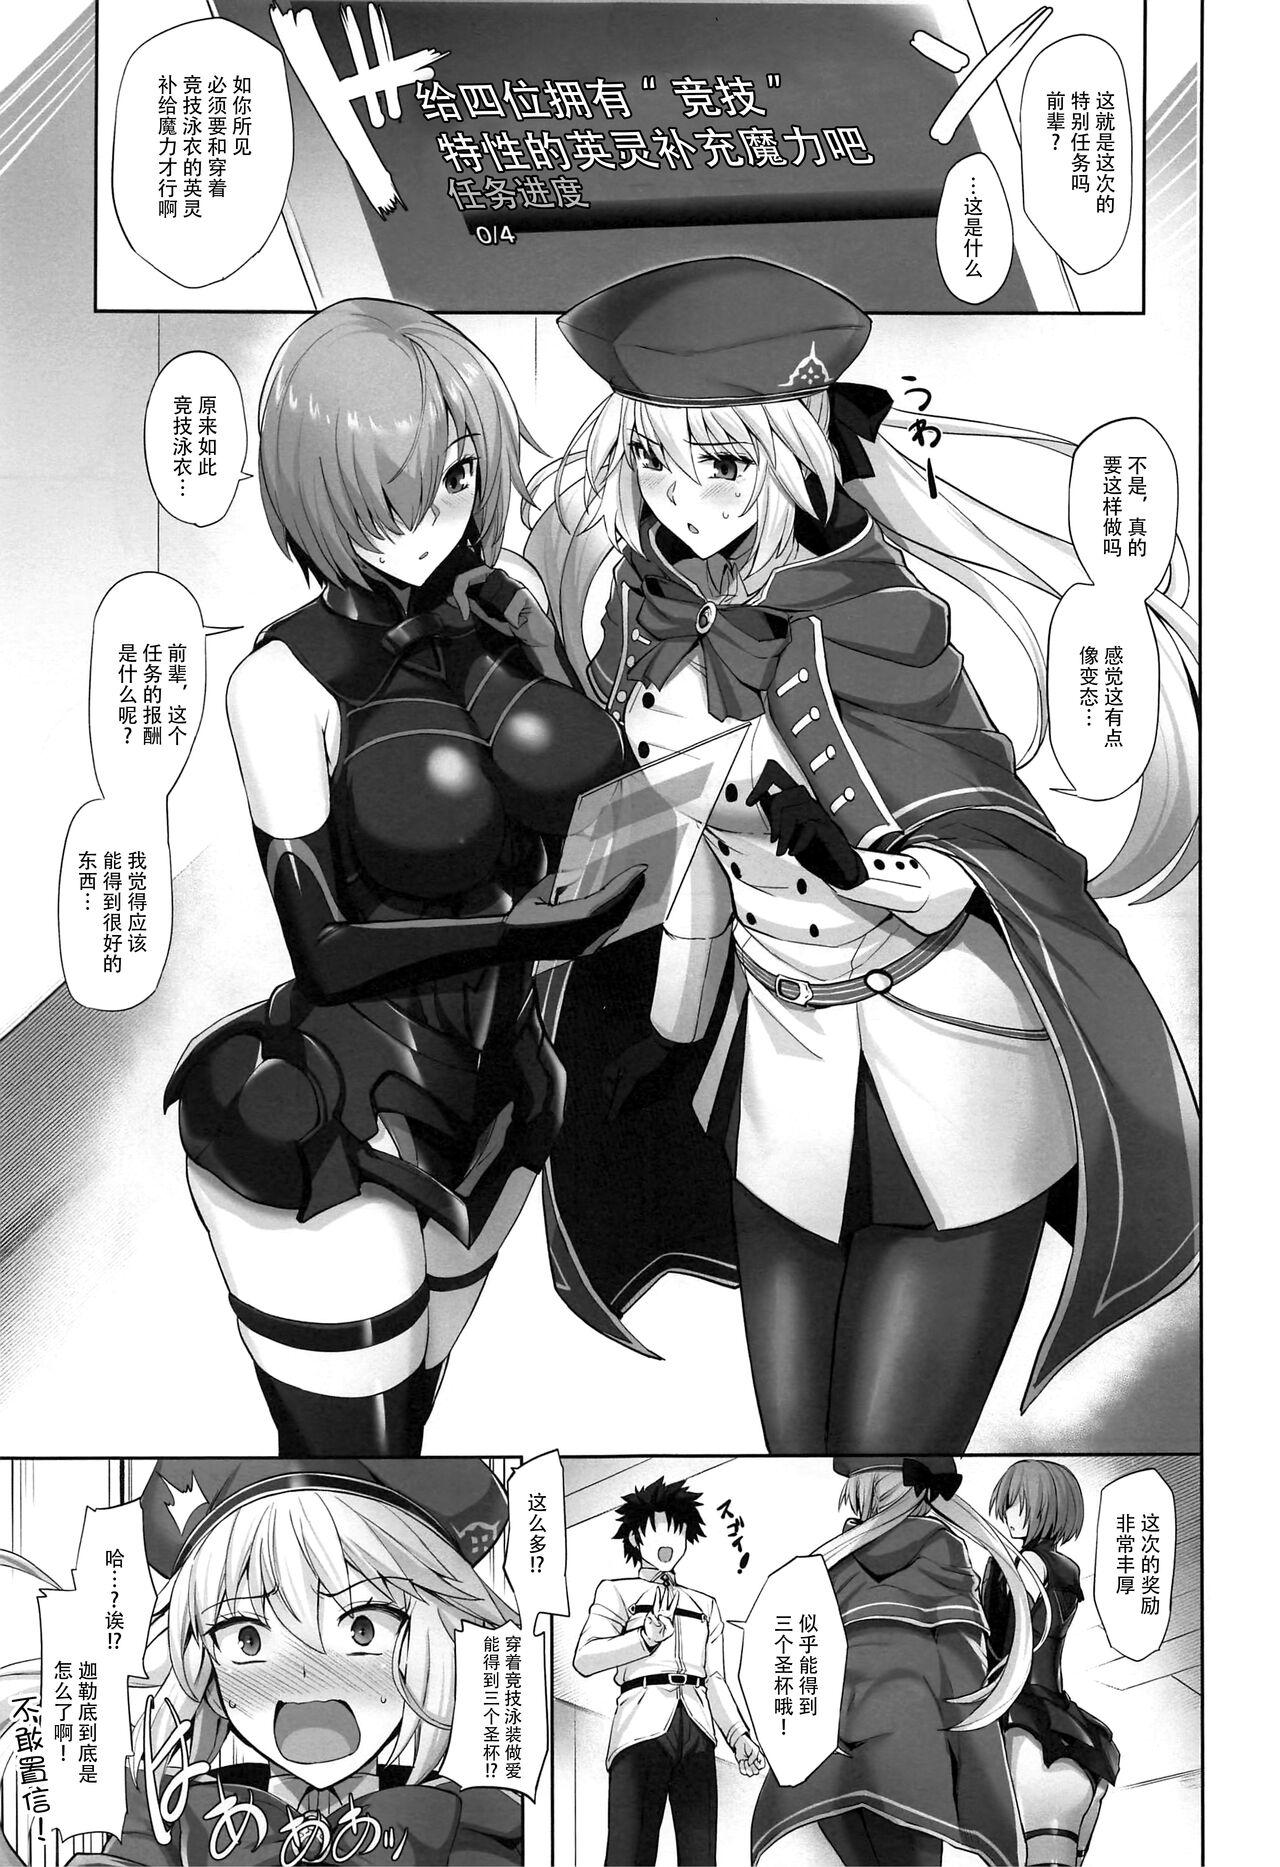 Maid Kyouei Tokusei no Servant to 2 - Fate grand order Livesex - Page 2